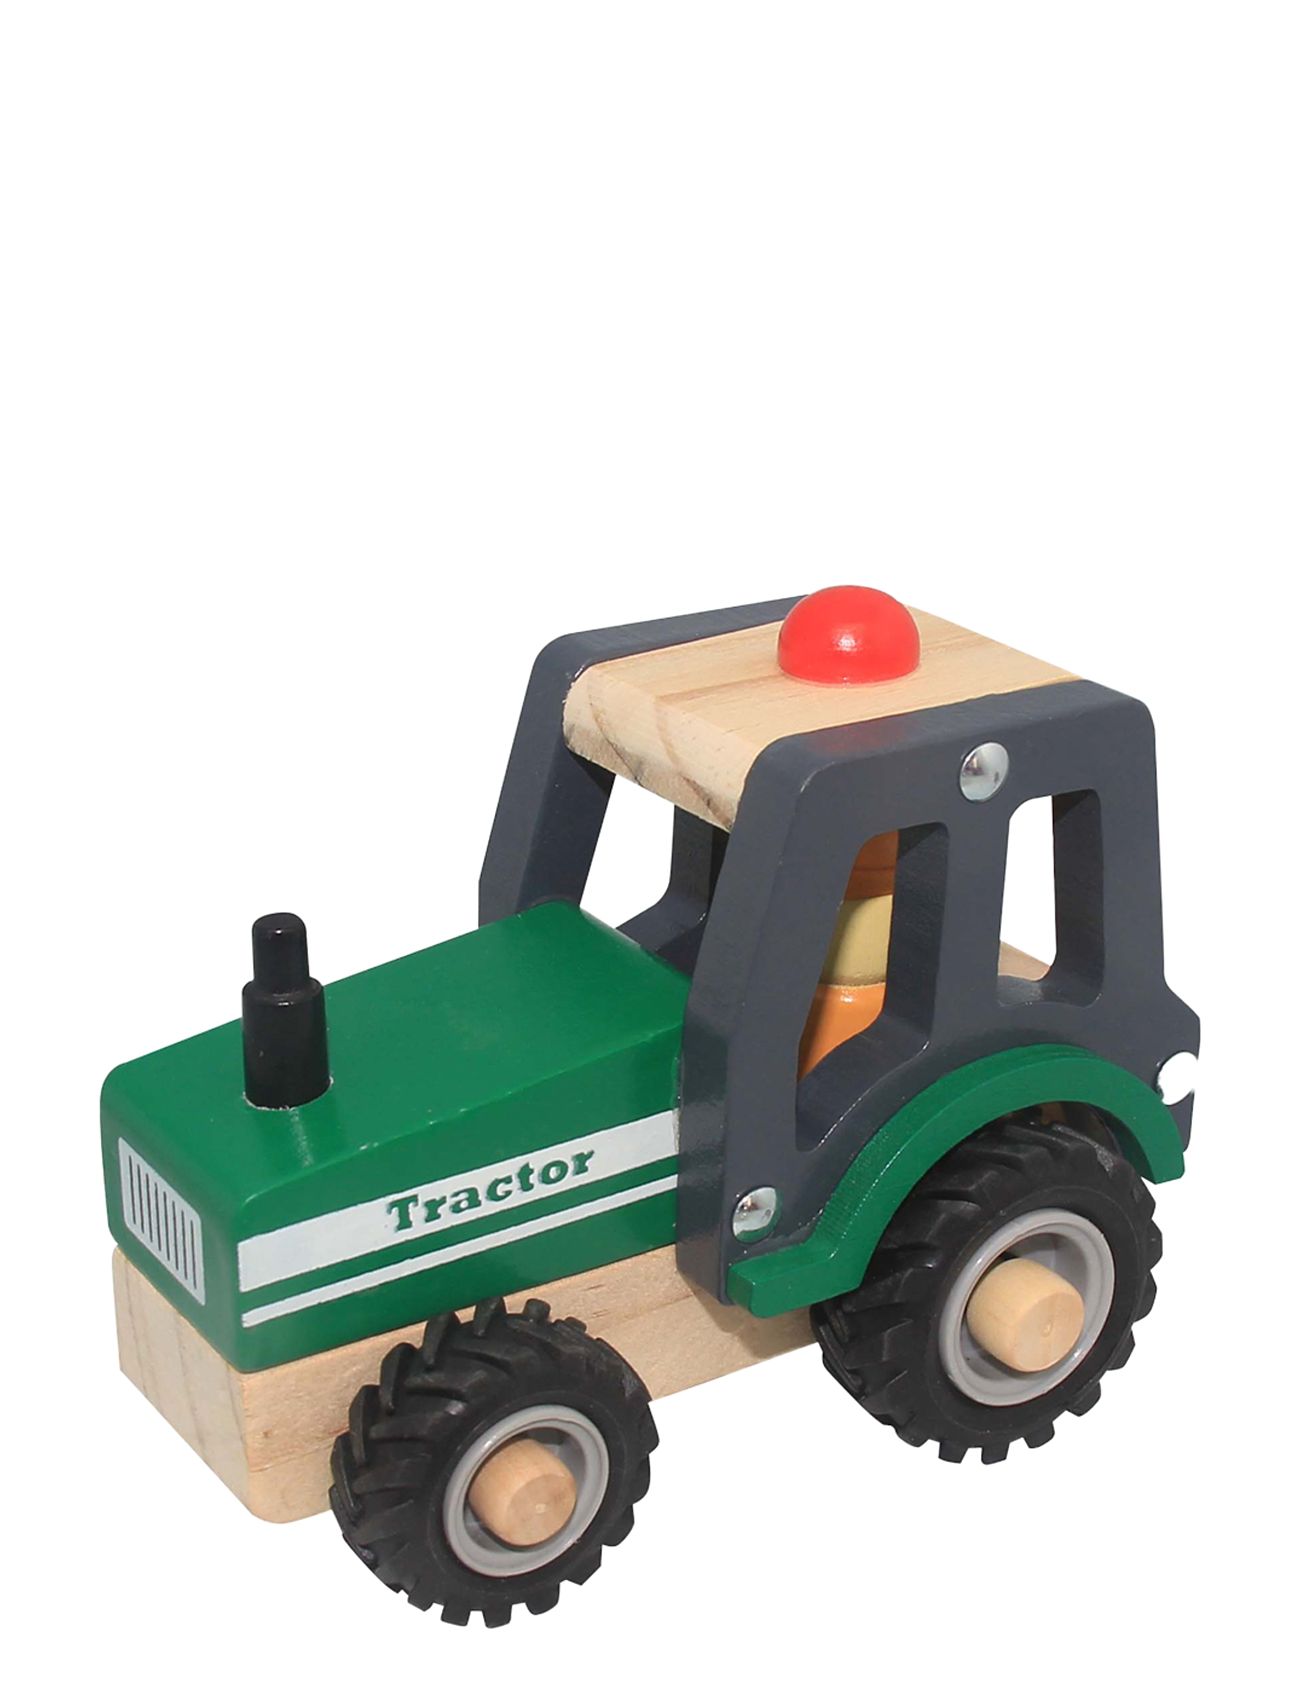 Wooden Tractor W. Rubber Wheels 100% Fsc Toys Toy Cars & Vehicles Toy Vehicles Trucks Green Magni Toys